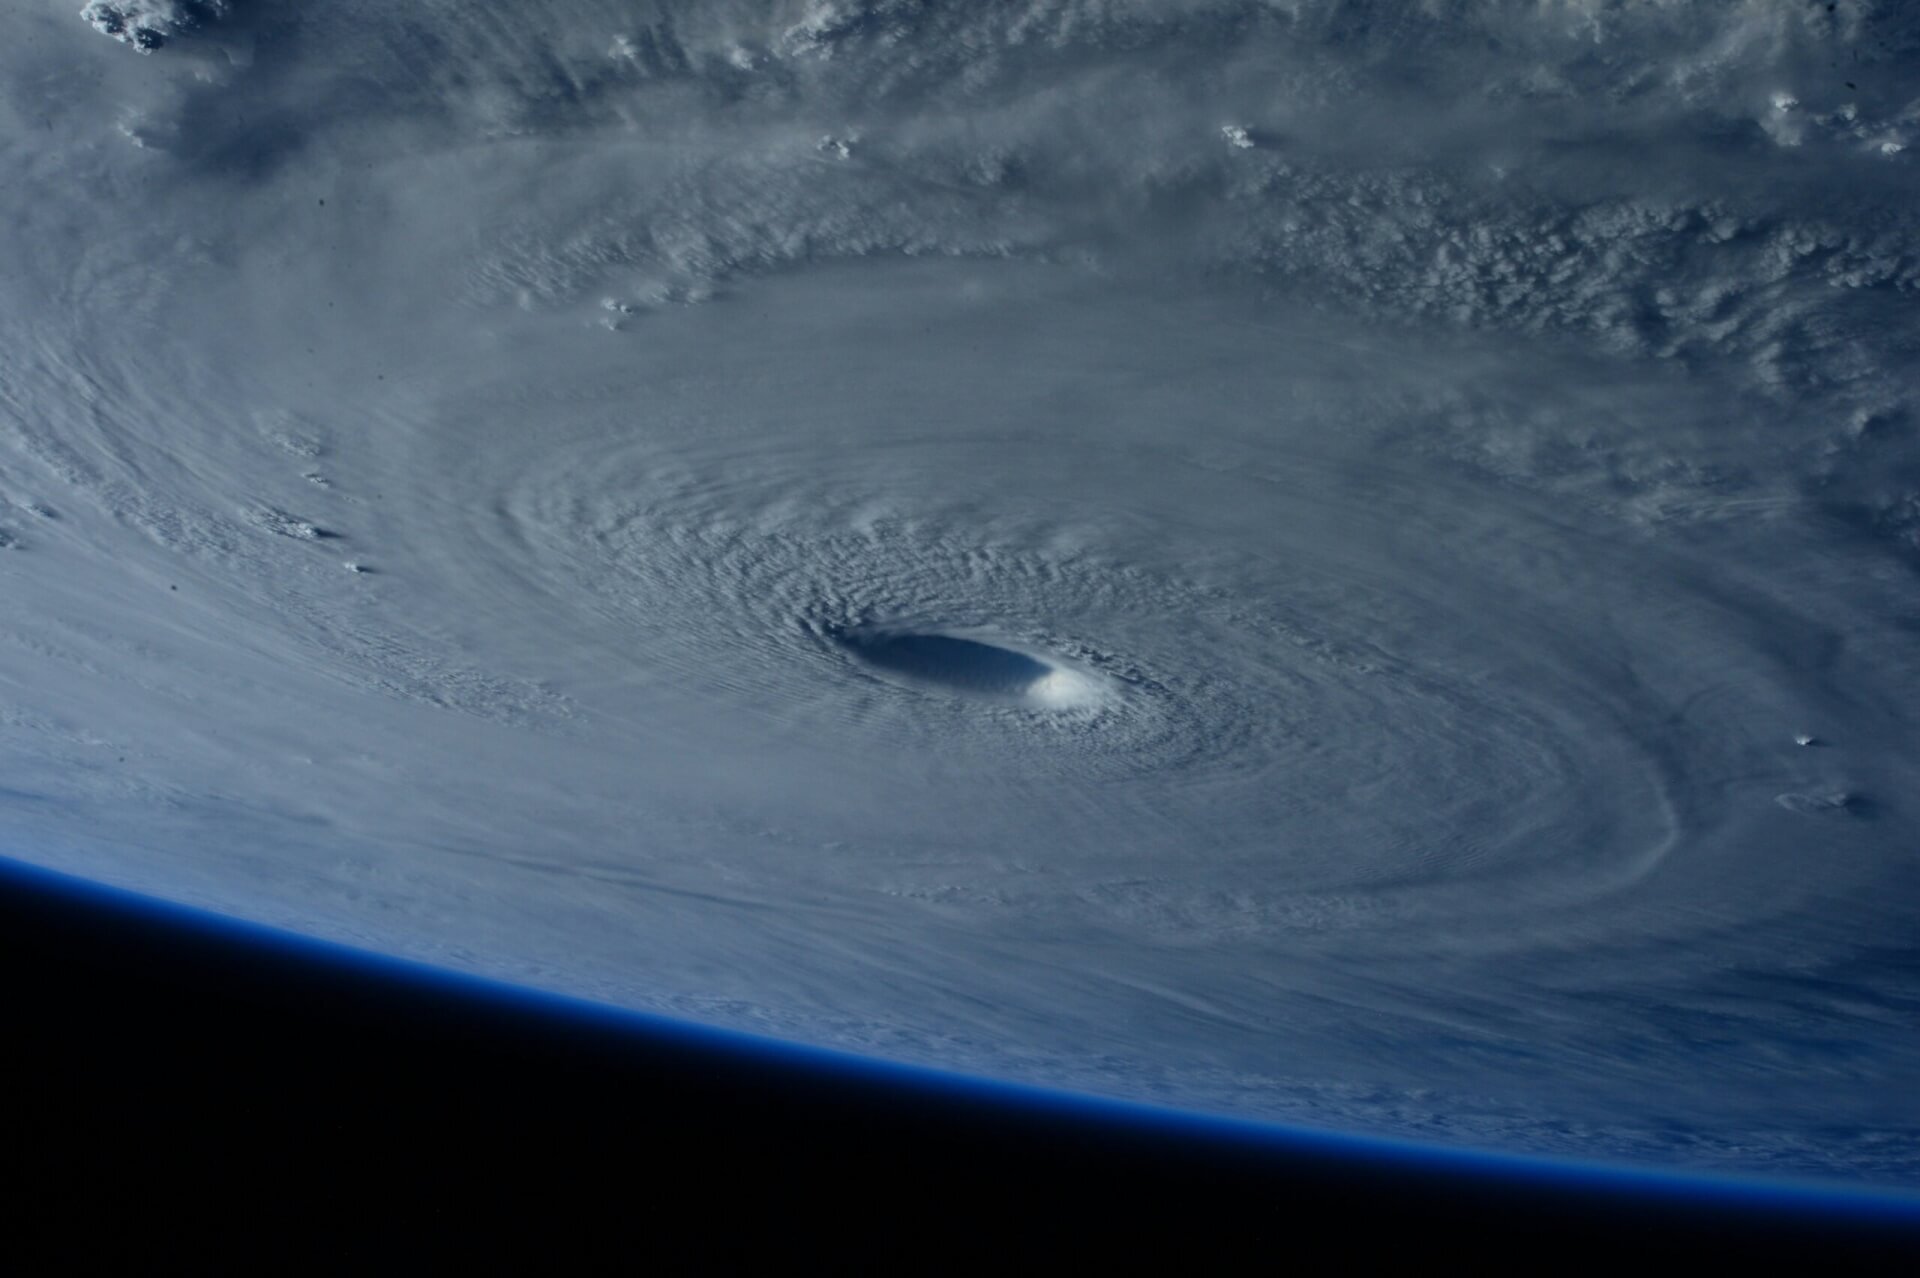 Giant hurricane seen from space